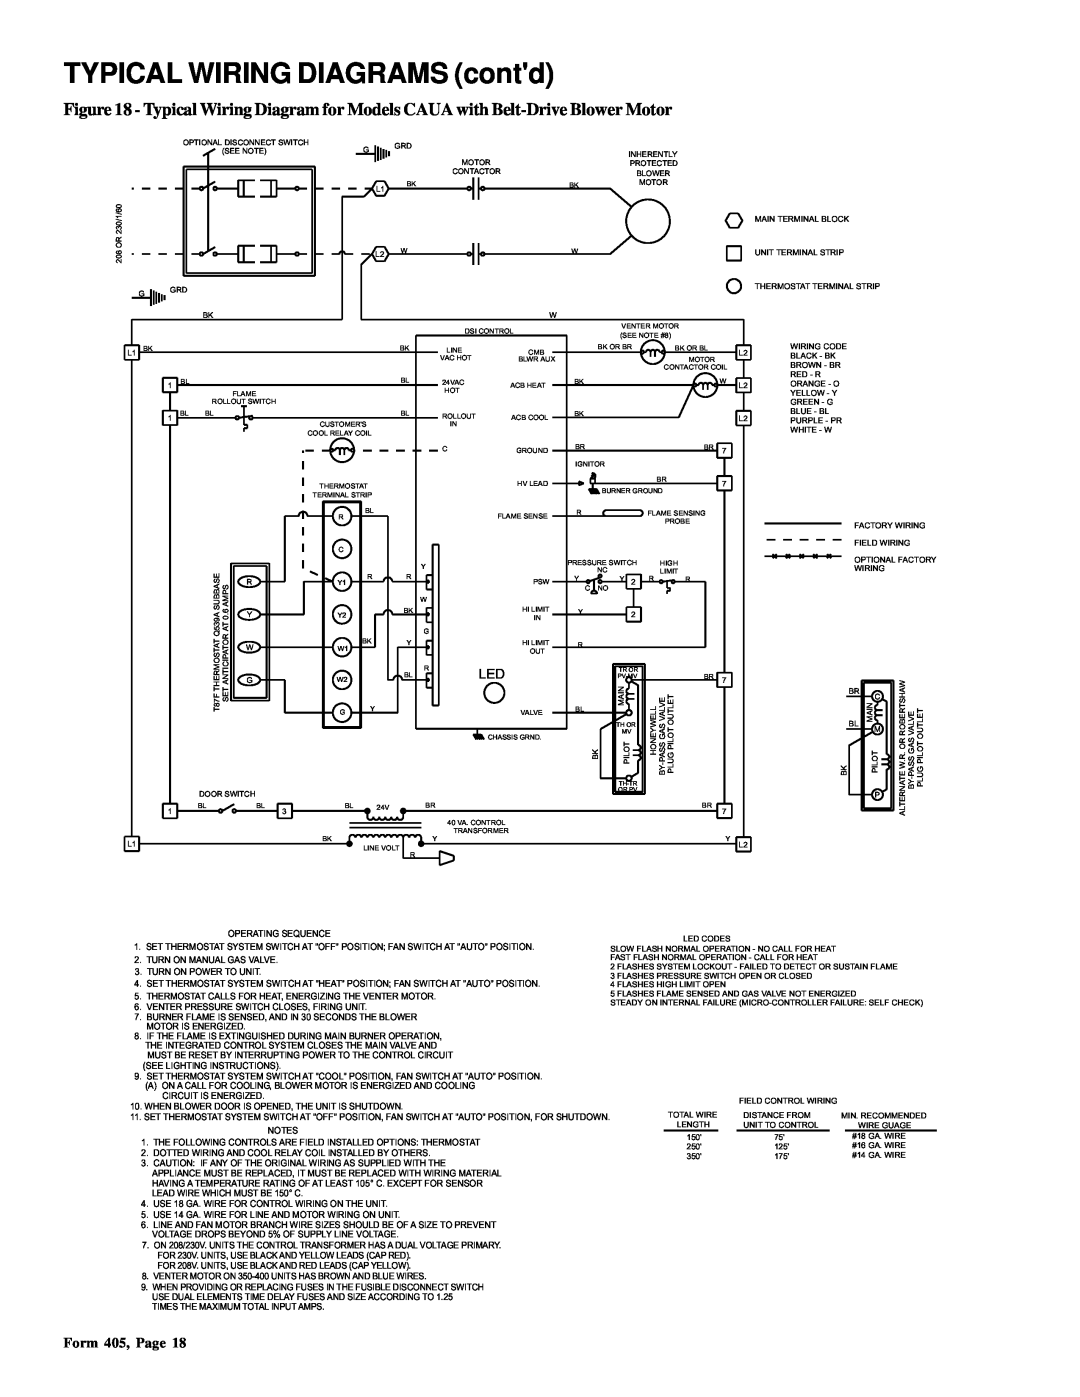 Thomas & Betts RGM 405, RZ405 dimensions TYPICAL WIRING DIAGRAMS contd, Form 405, Page 